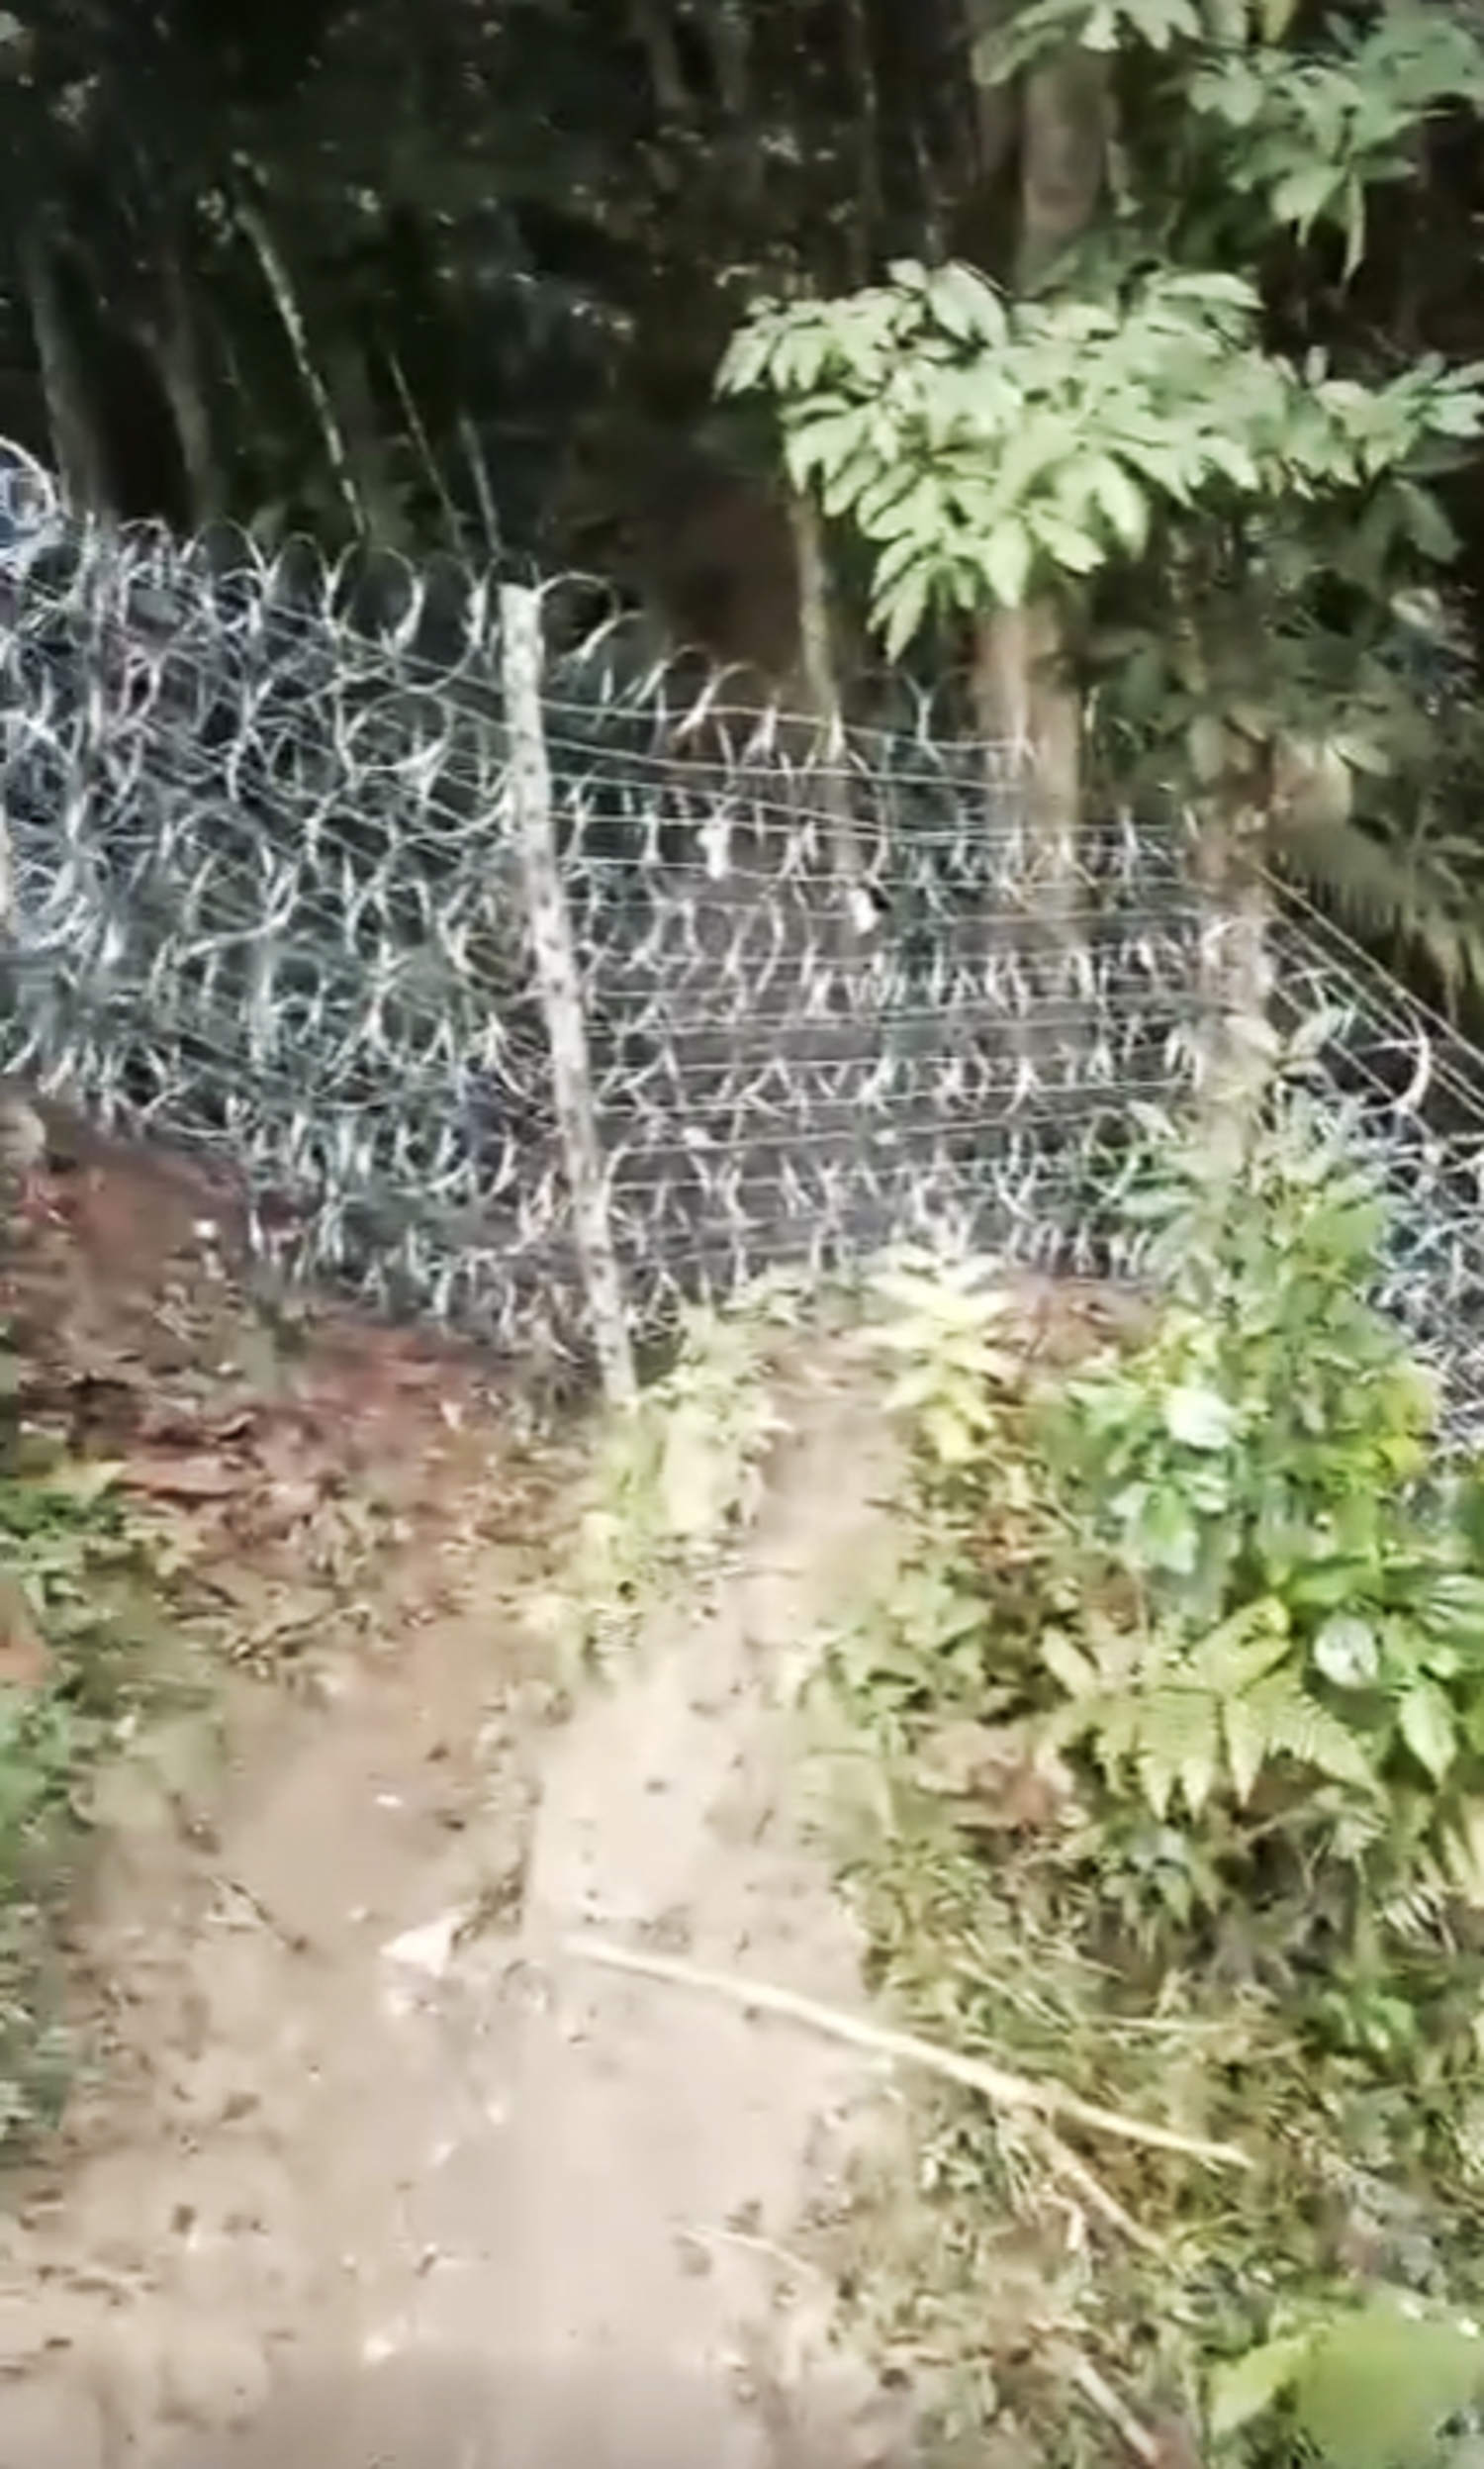 Panama is using barbed wire to try to block a major route for U.S.-bound migrants